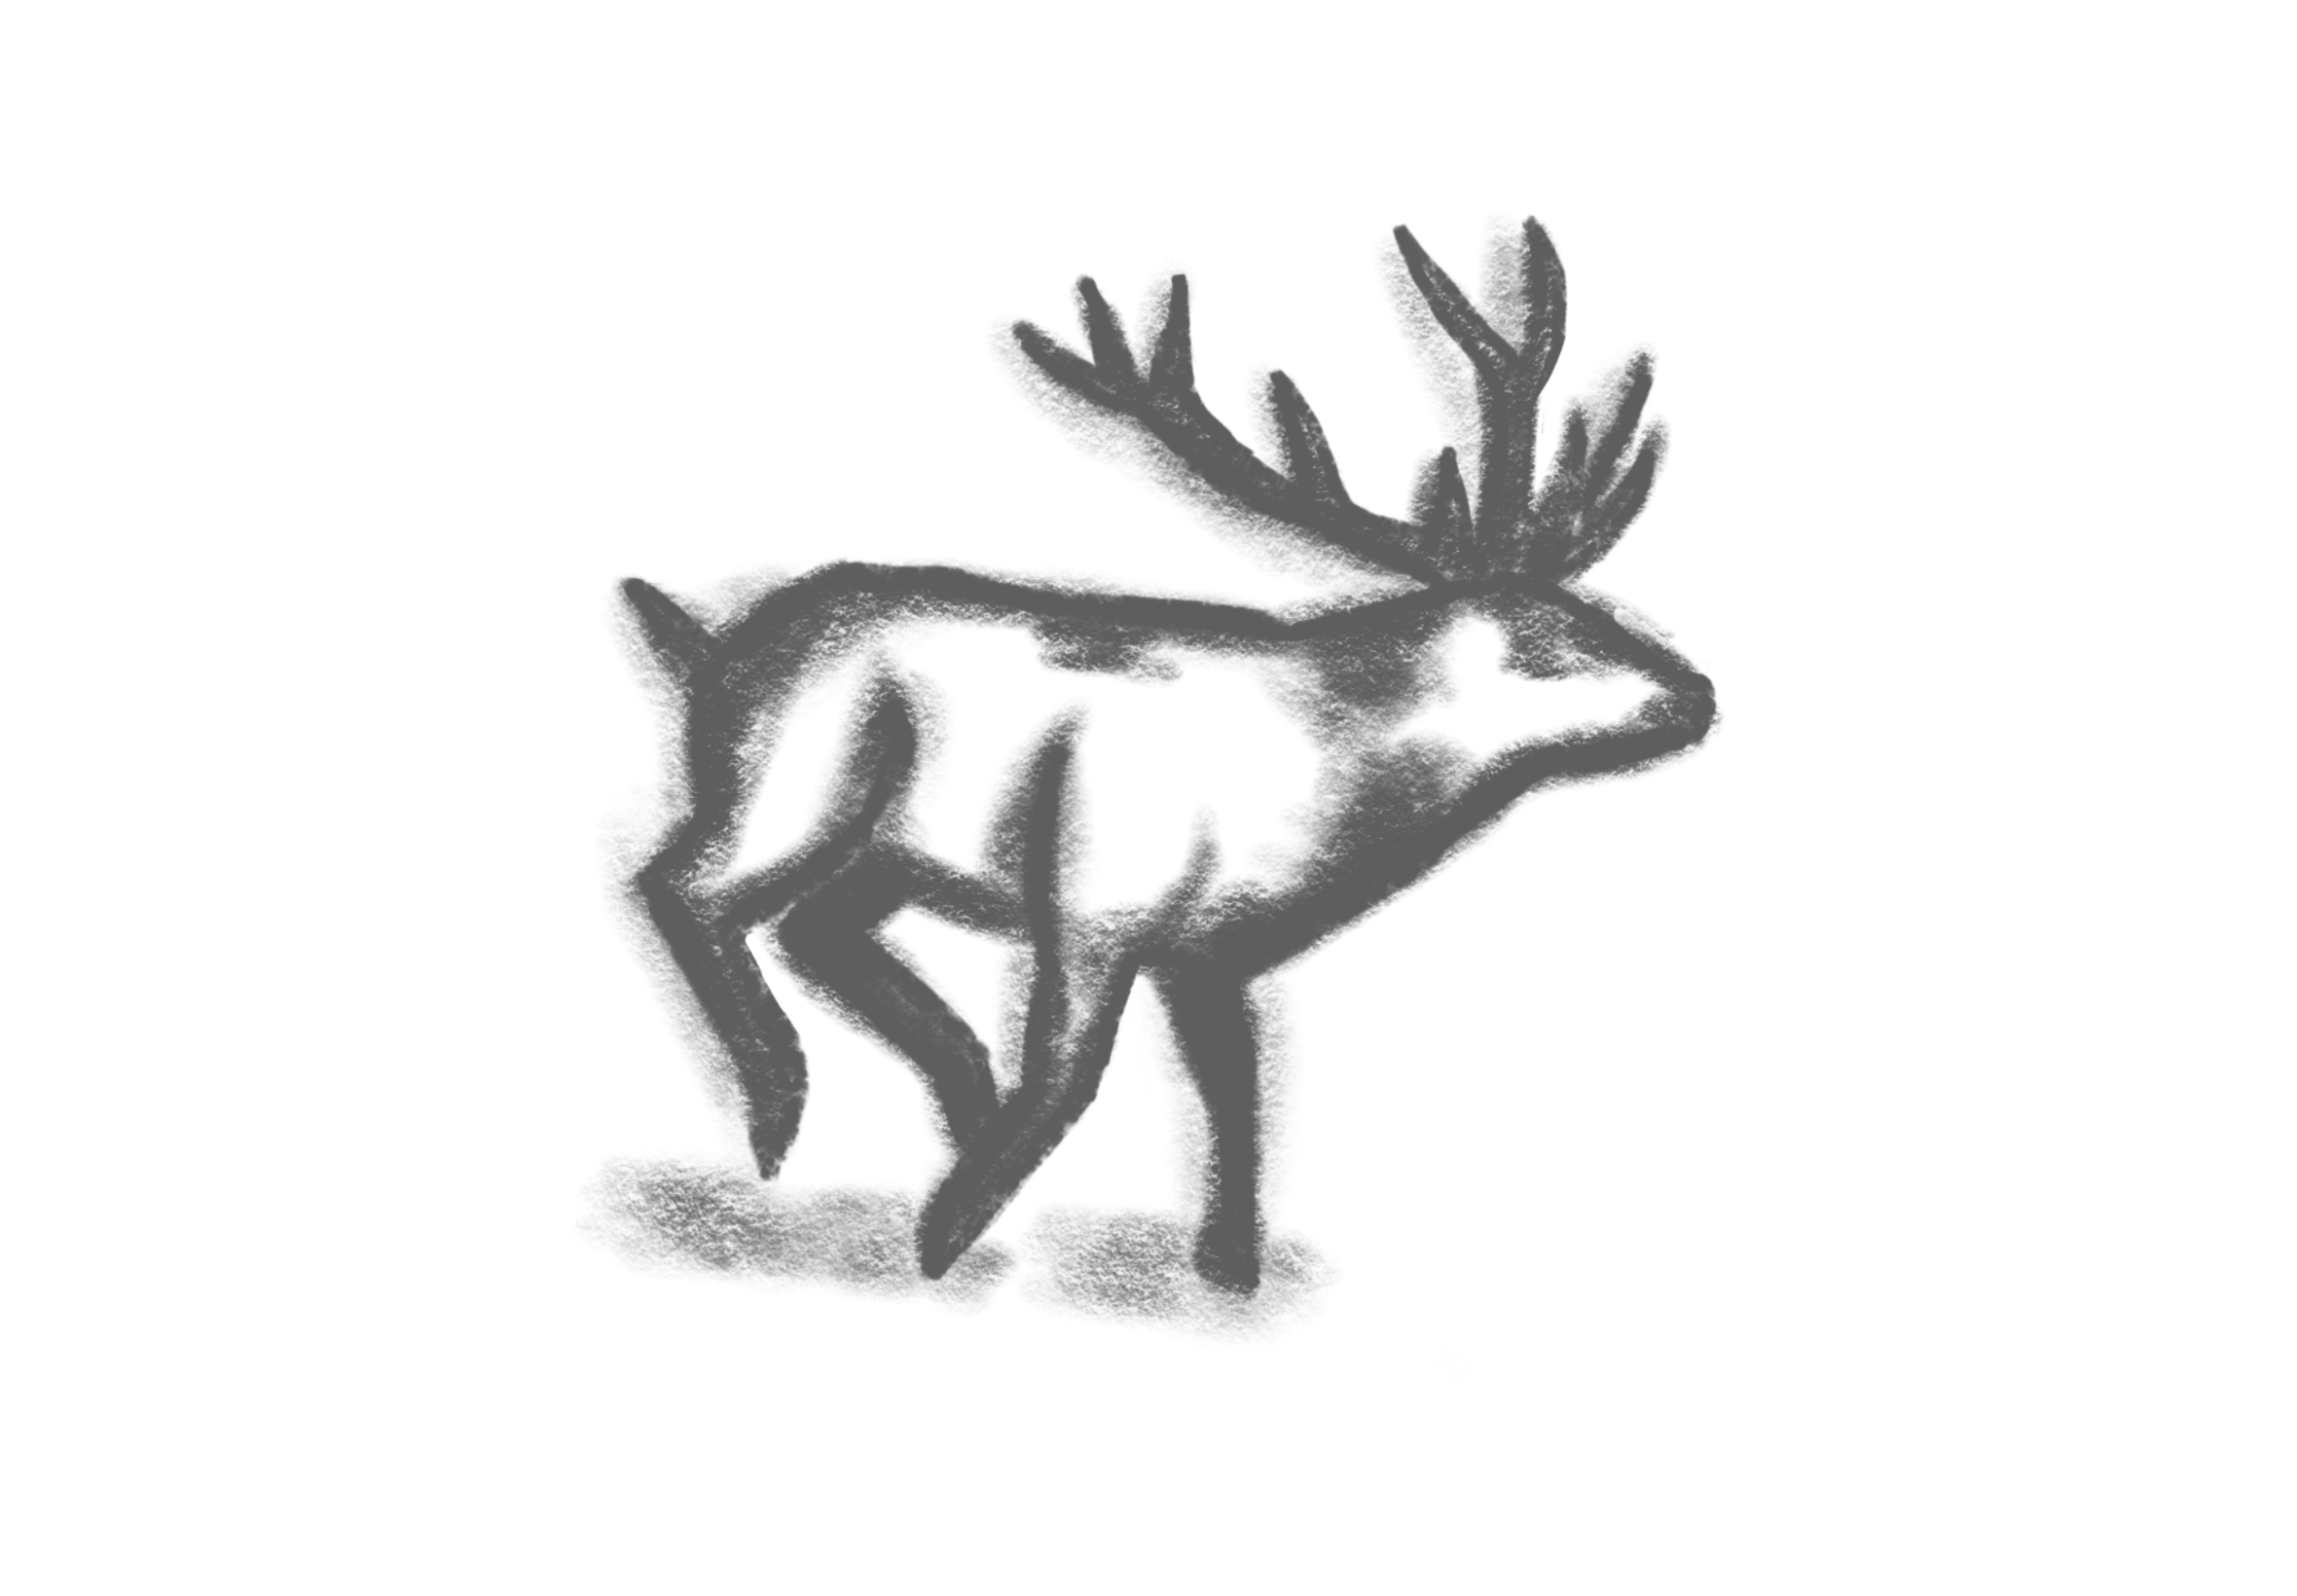 A simple charcoal drawing of a deer